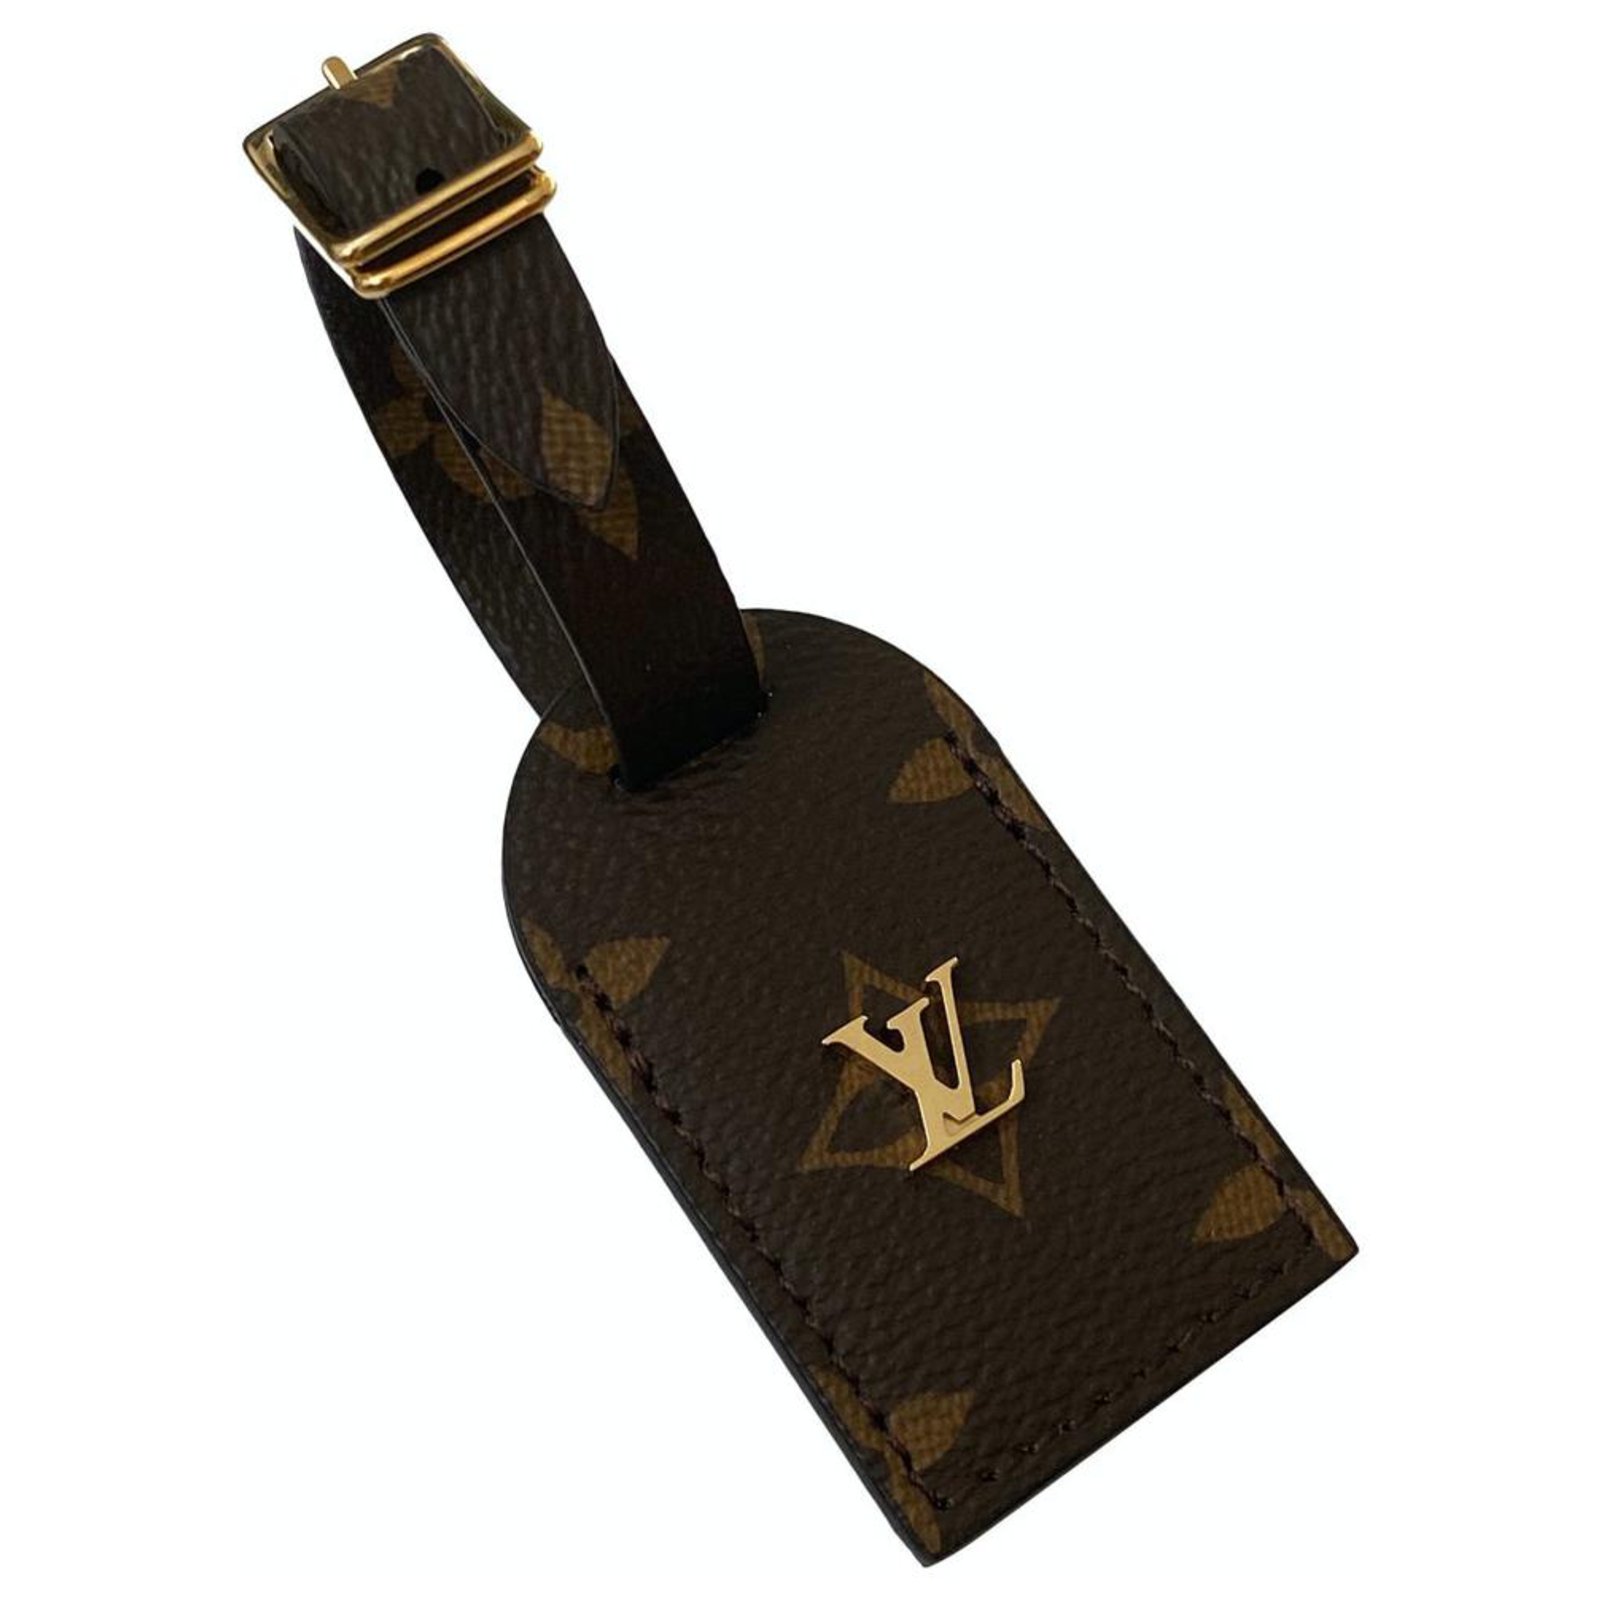 Louis Vuitton Luggage Tag - For Sale in Kelowna - Castanet Classifieds